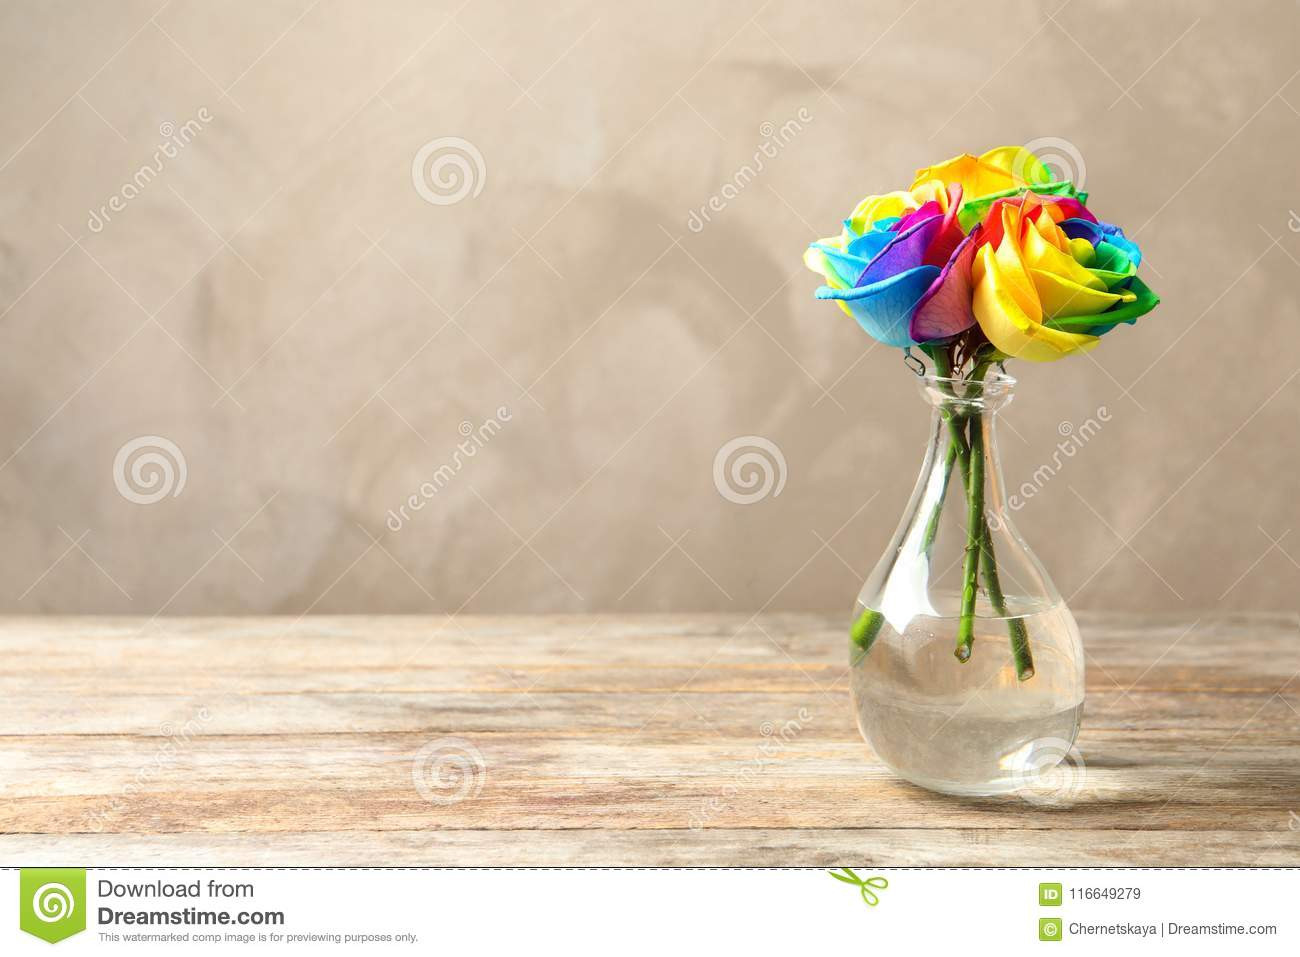 12 Unique Multi Colored Glass Vases 2024 free download multi colored glass vases of vase with amazing rainbow rose flowers stock image image of event intended for download vase with amazing rainbow rose flowers stock image image of event blue